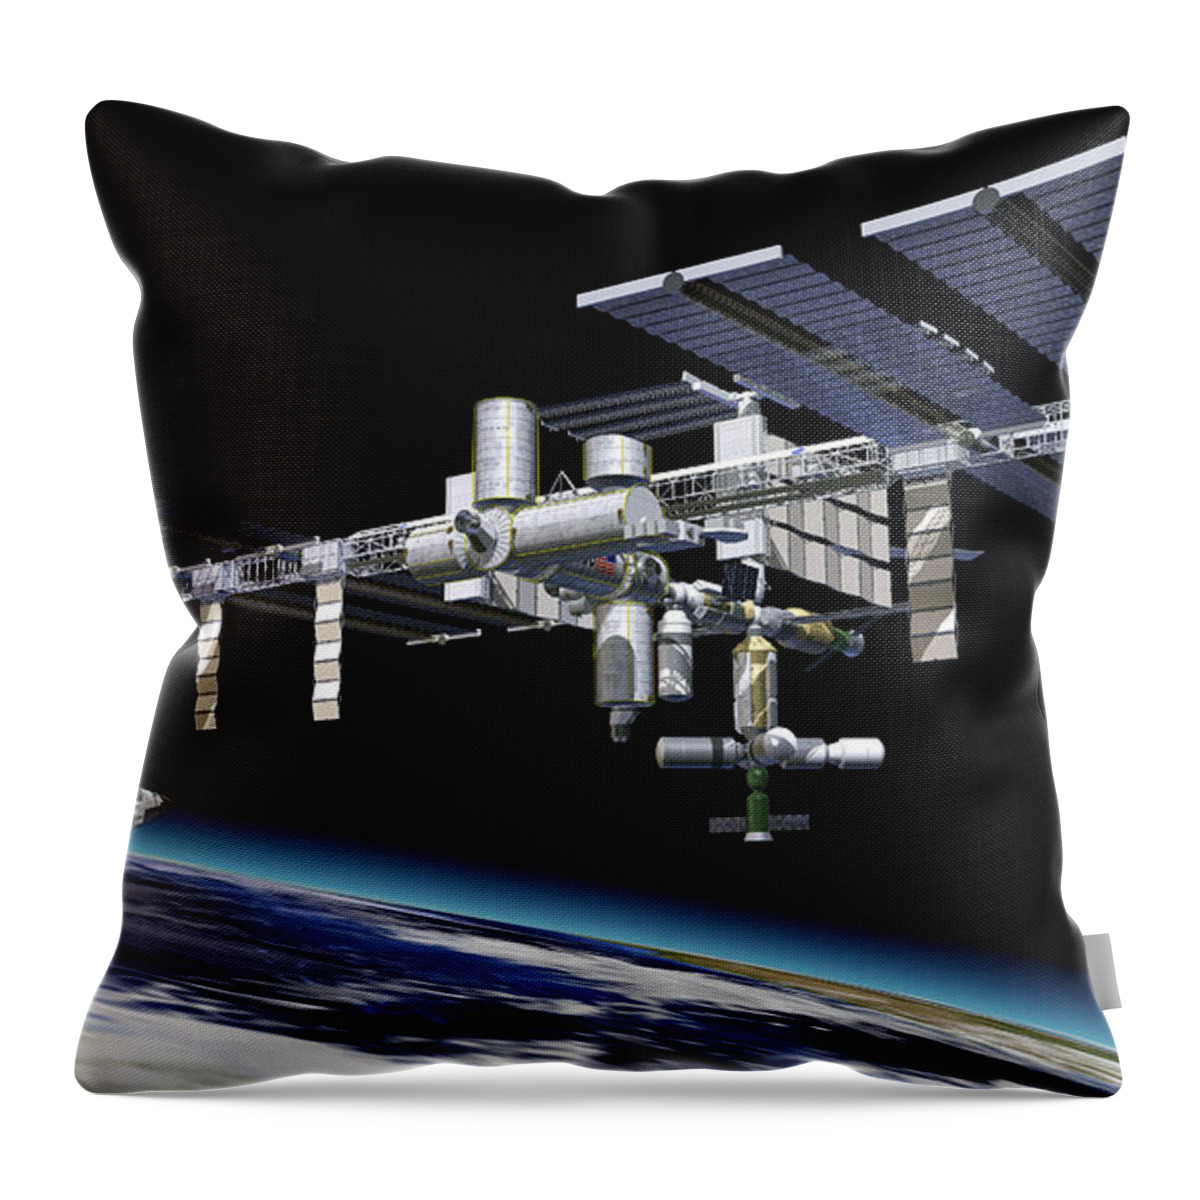 Three Dimensional Throw Pillow featuring the digital art Space Station In Orbit Around Earth #2 by Leonello Calvetti